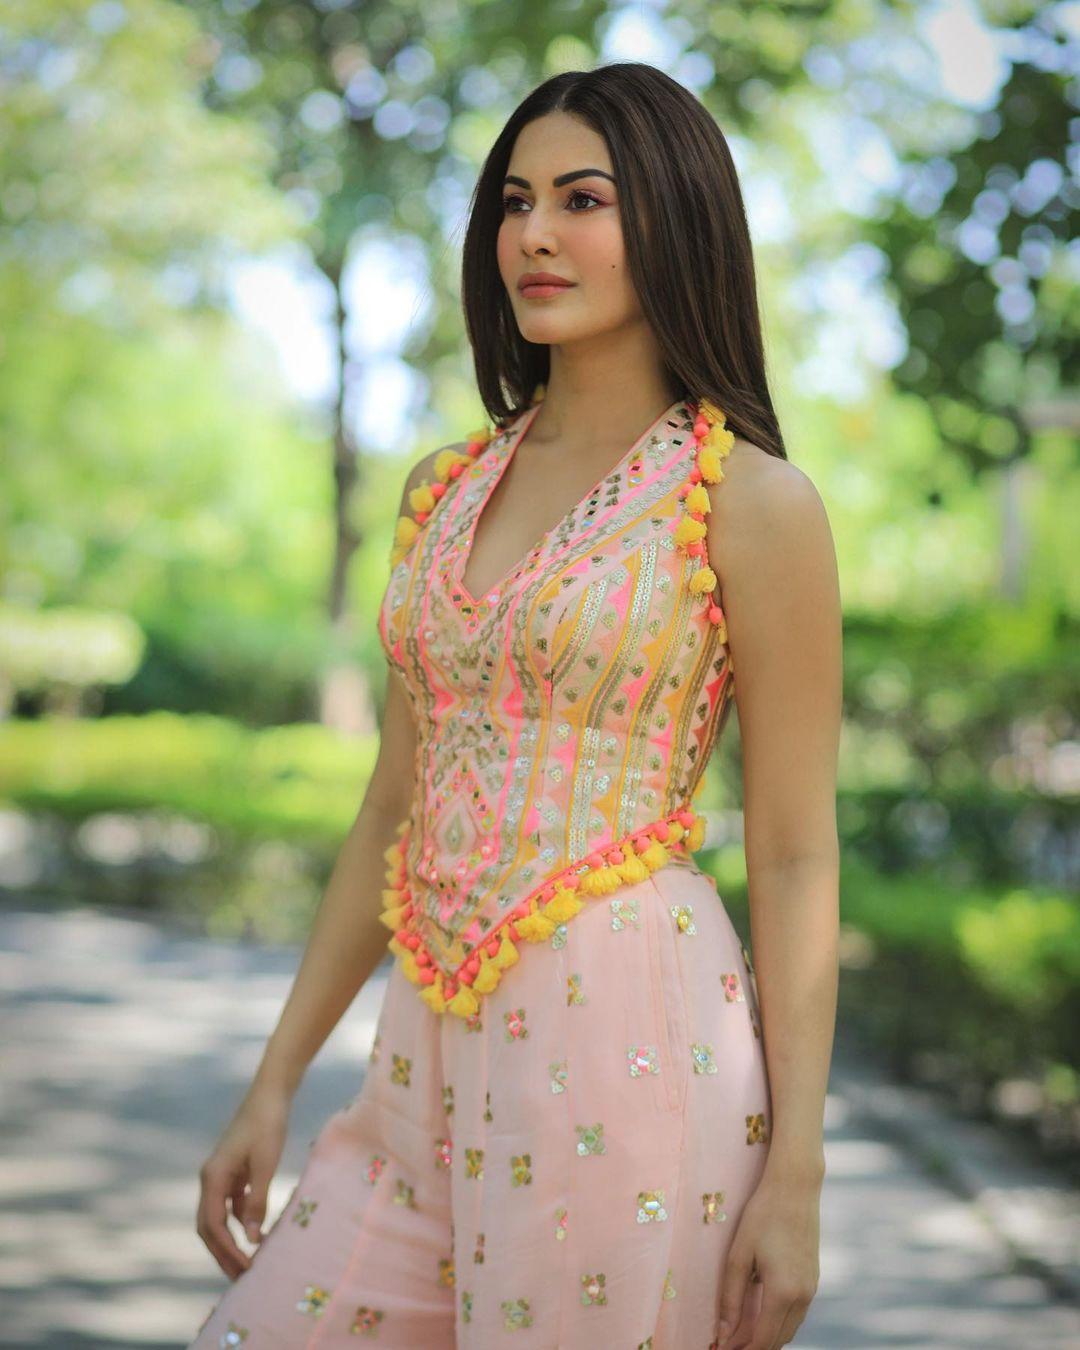 Working across various film industries, Amyra Dastur's unique style and striking looks have made her a notable figure that have earned heart eyes